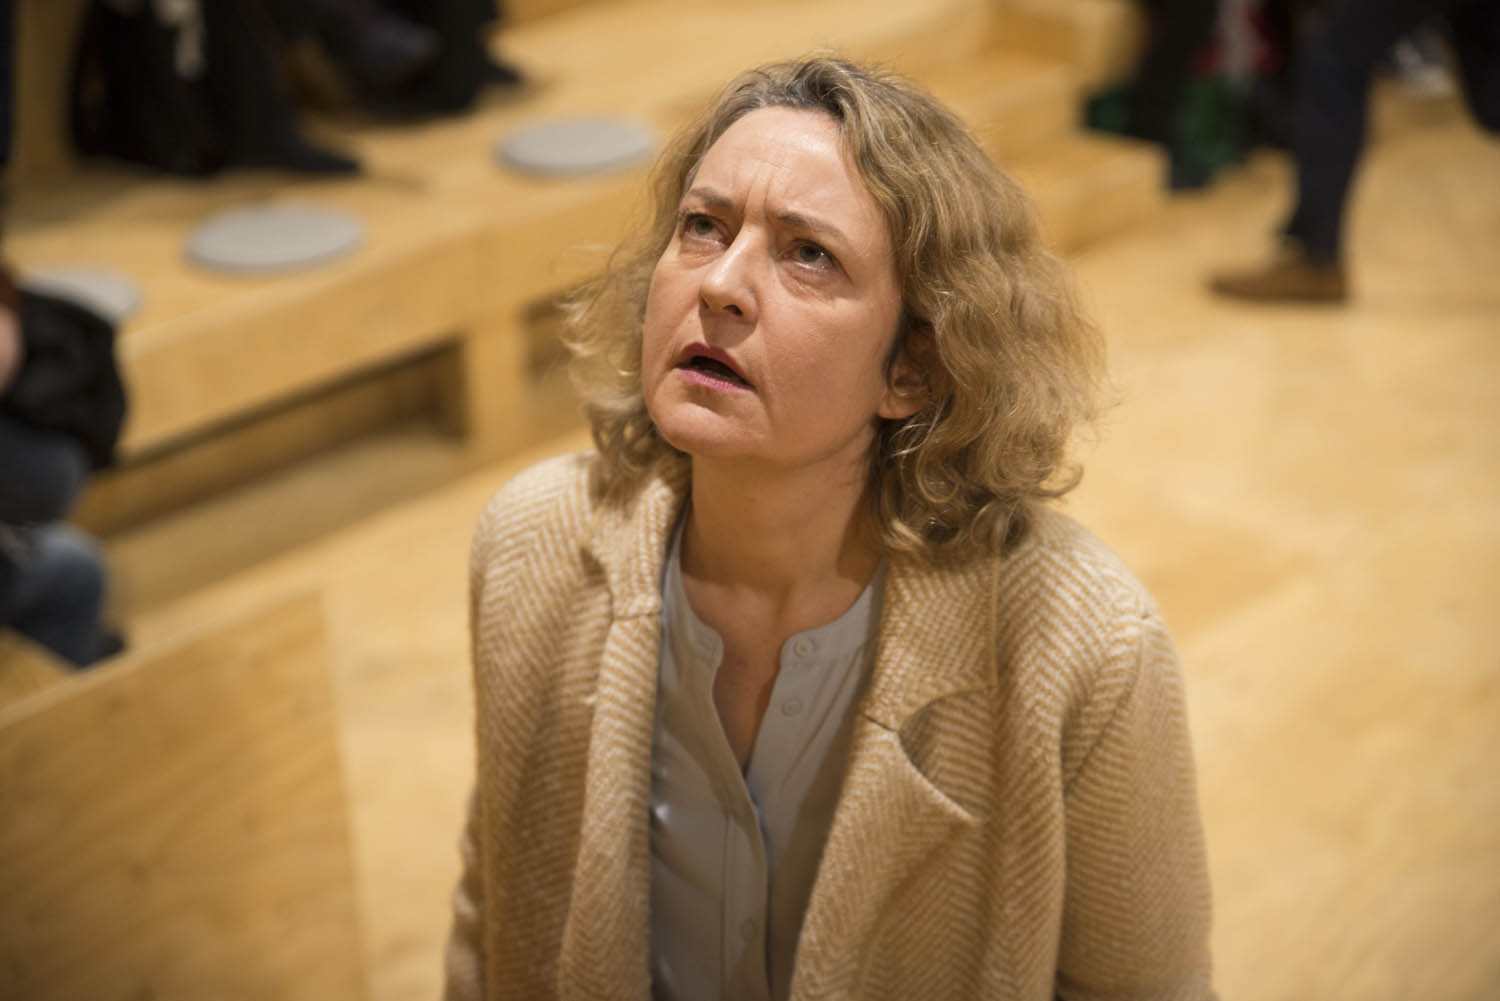 Lucy Briers in Wild East at the Young Vic. Photo by Gabriel Mokake.